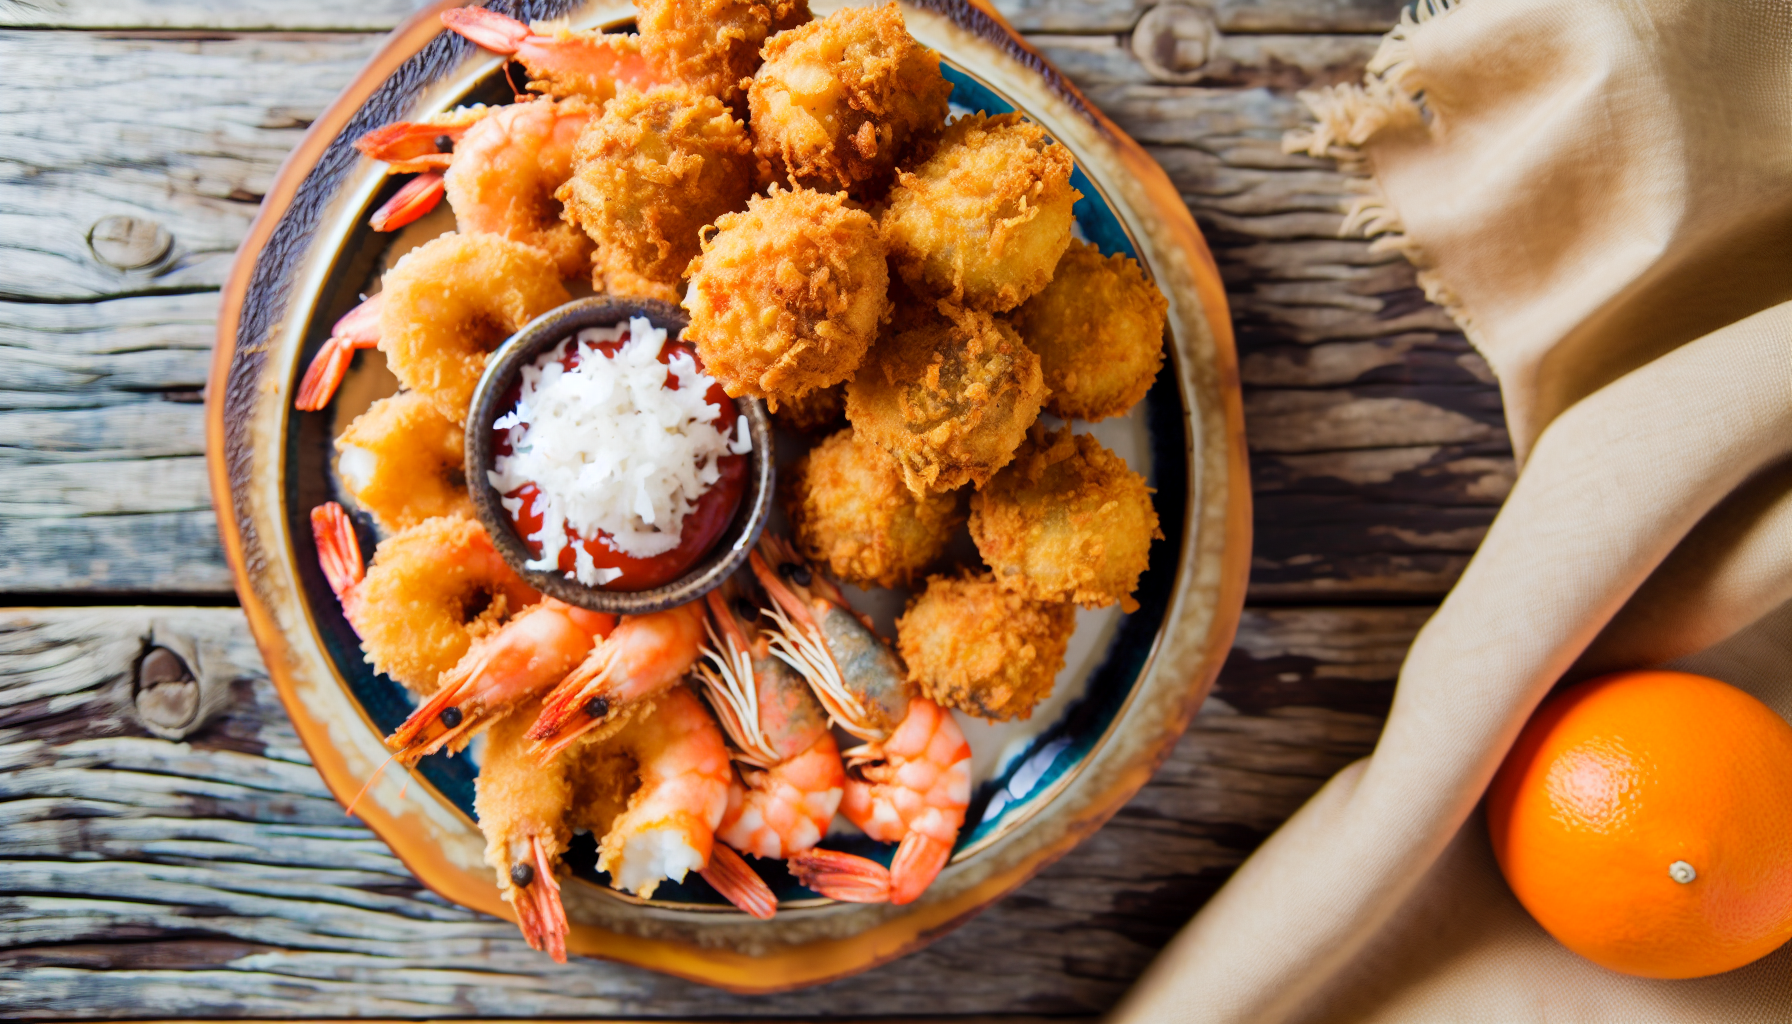 Platter of coconut shrimp and conch fritters